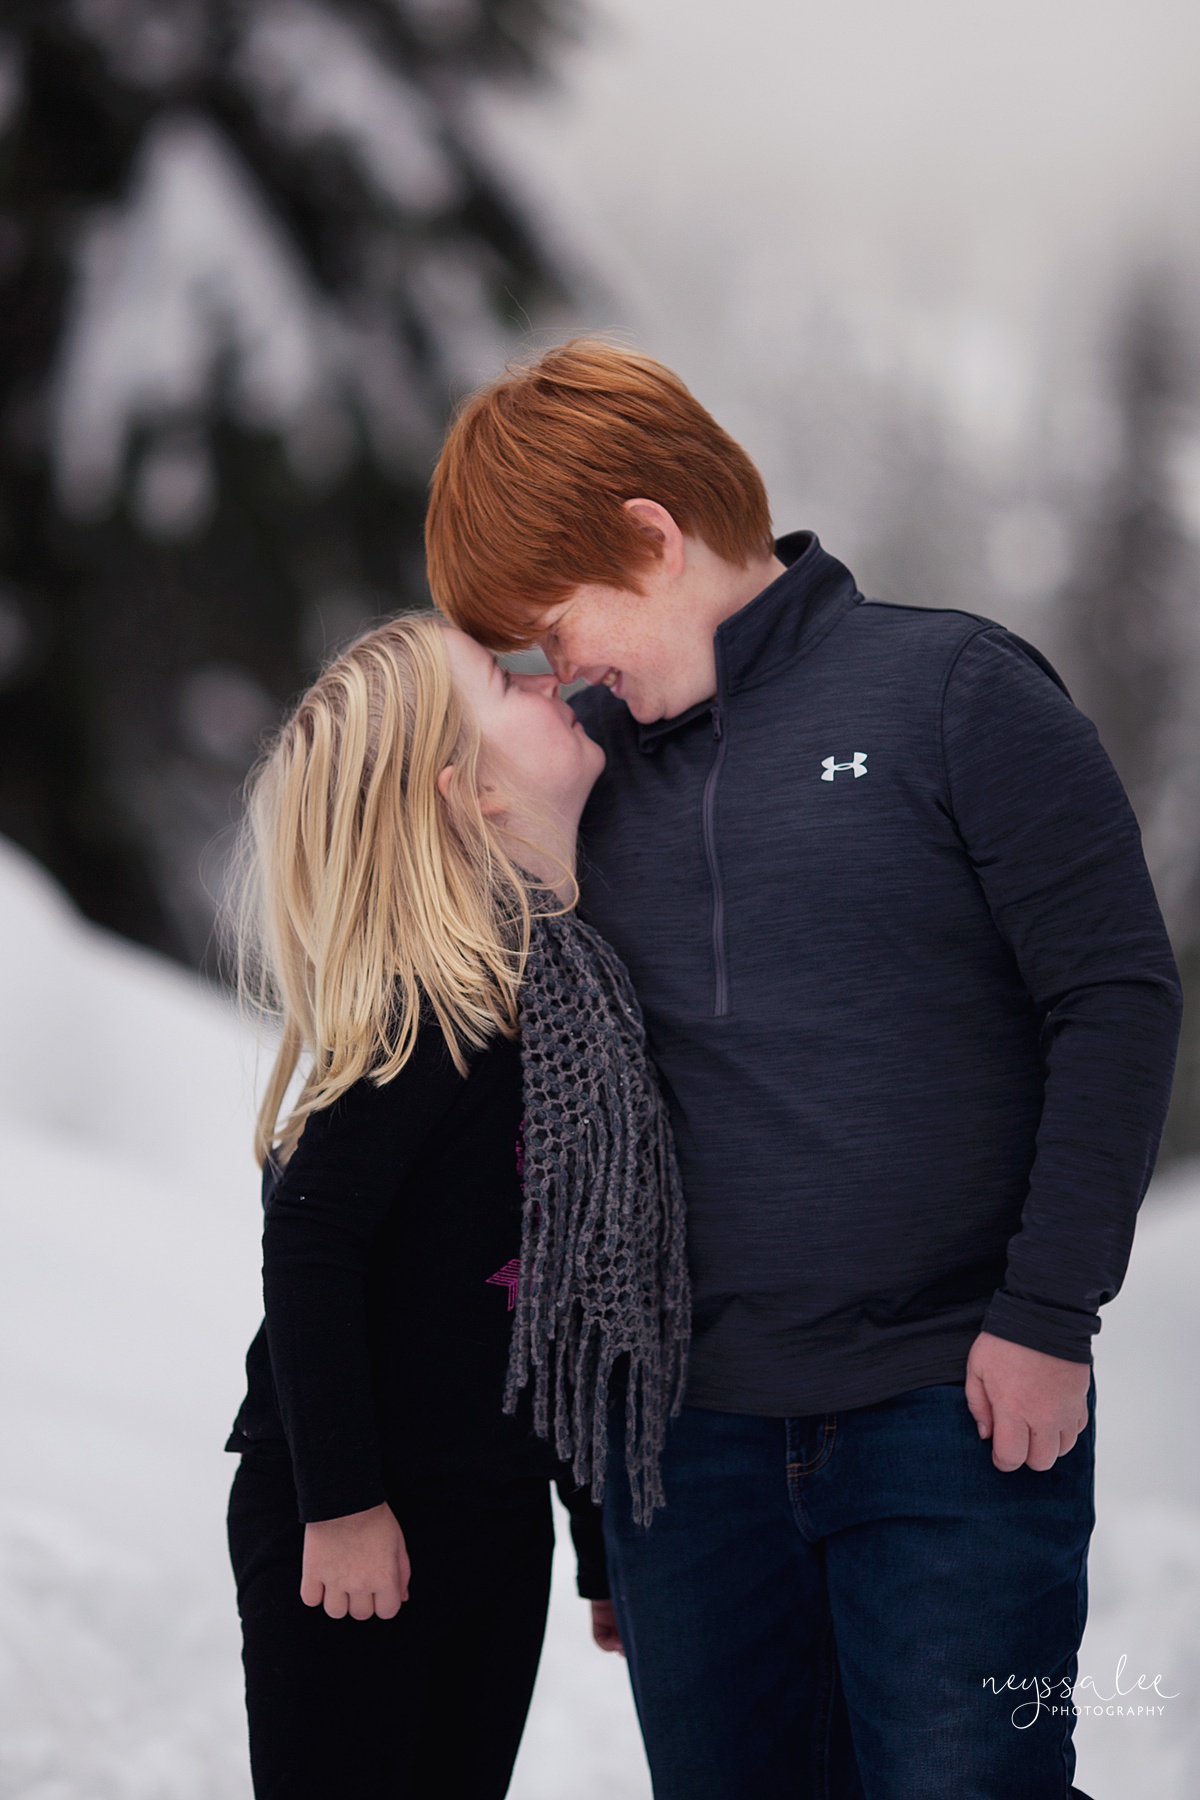 Neyssa Lee Photography, Snoqualmie Family Photographer, Family photos in the snow, Brother and Sister